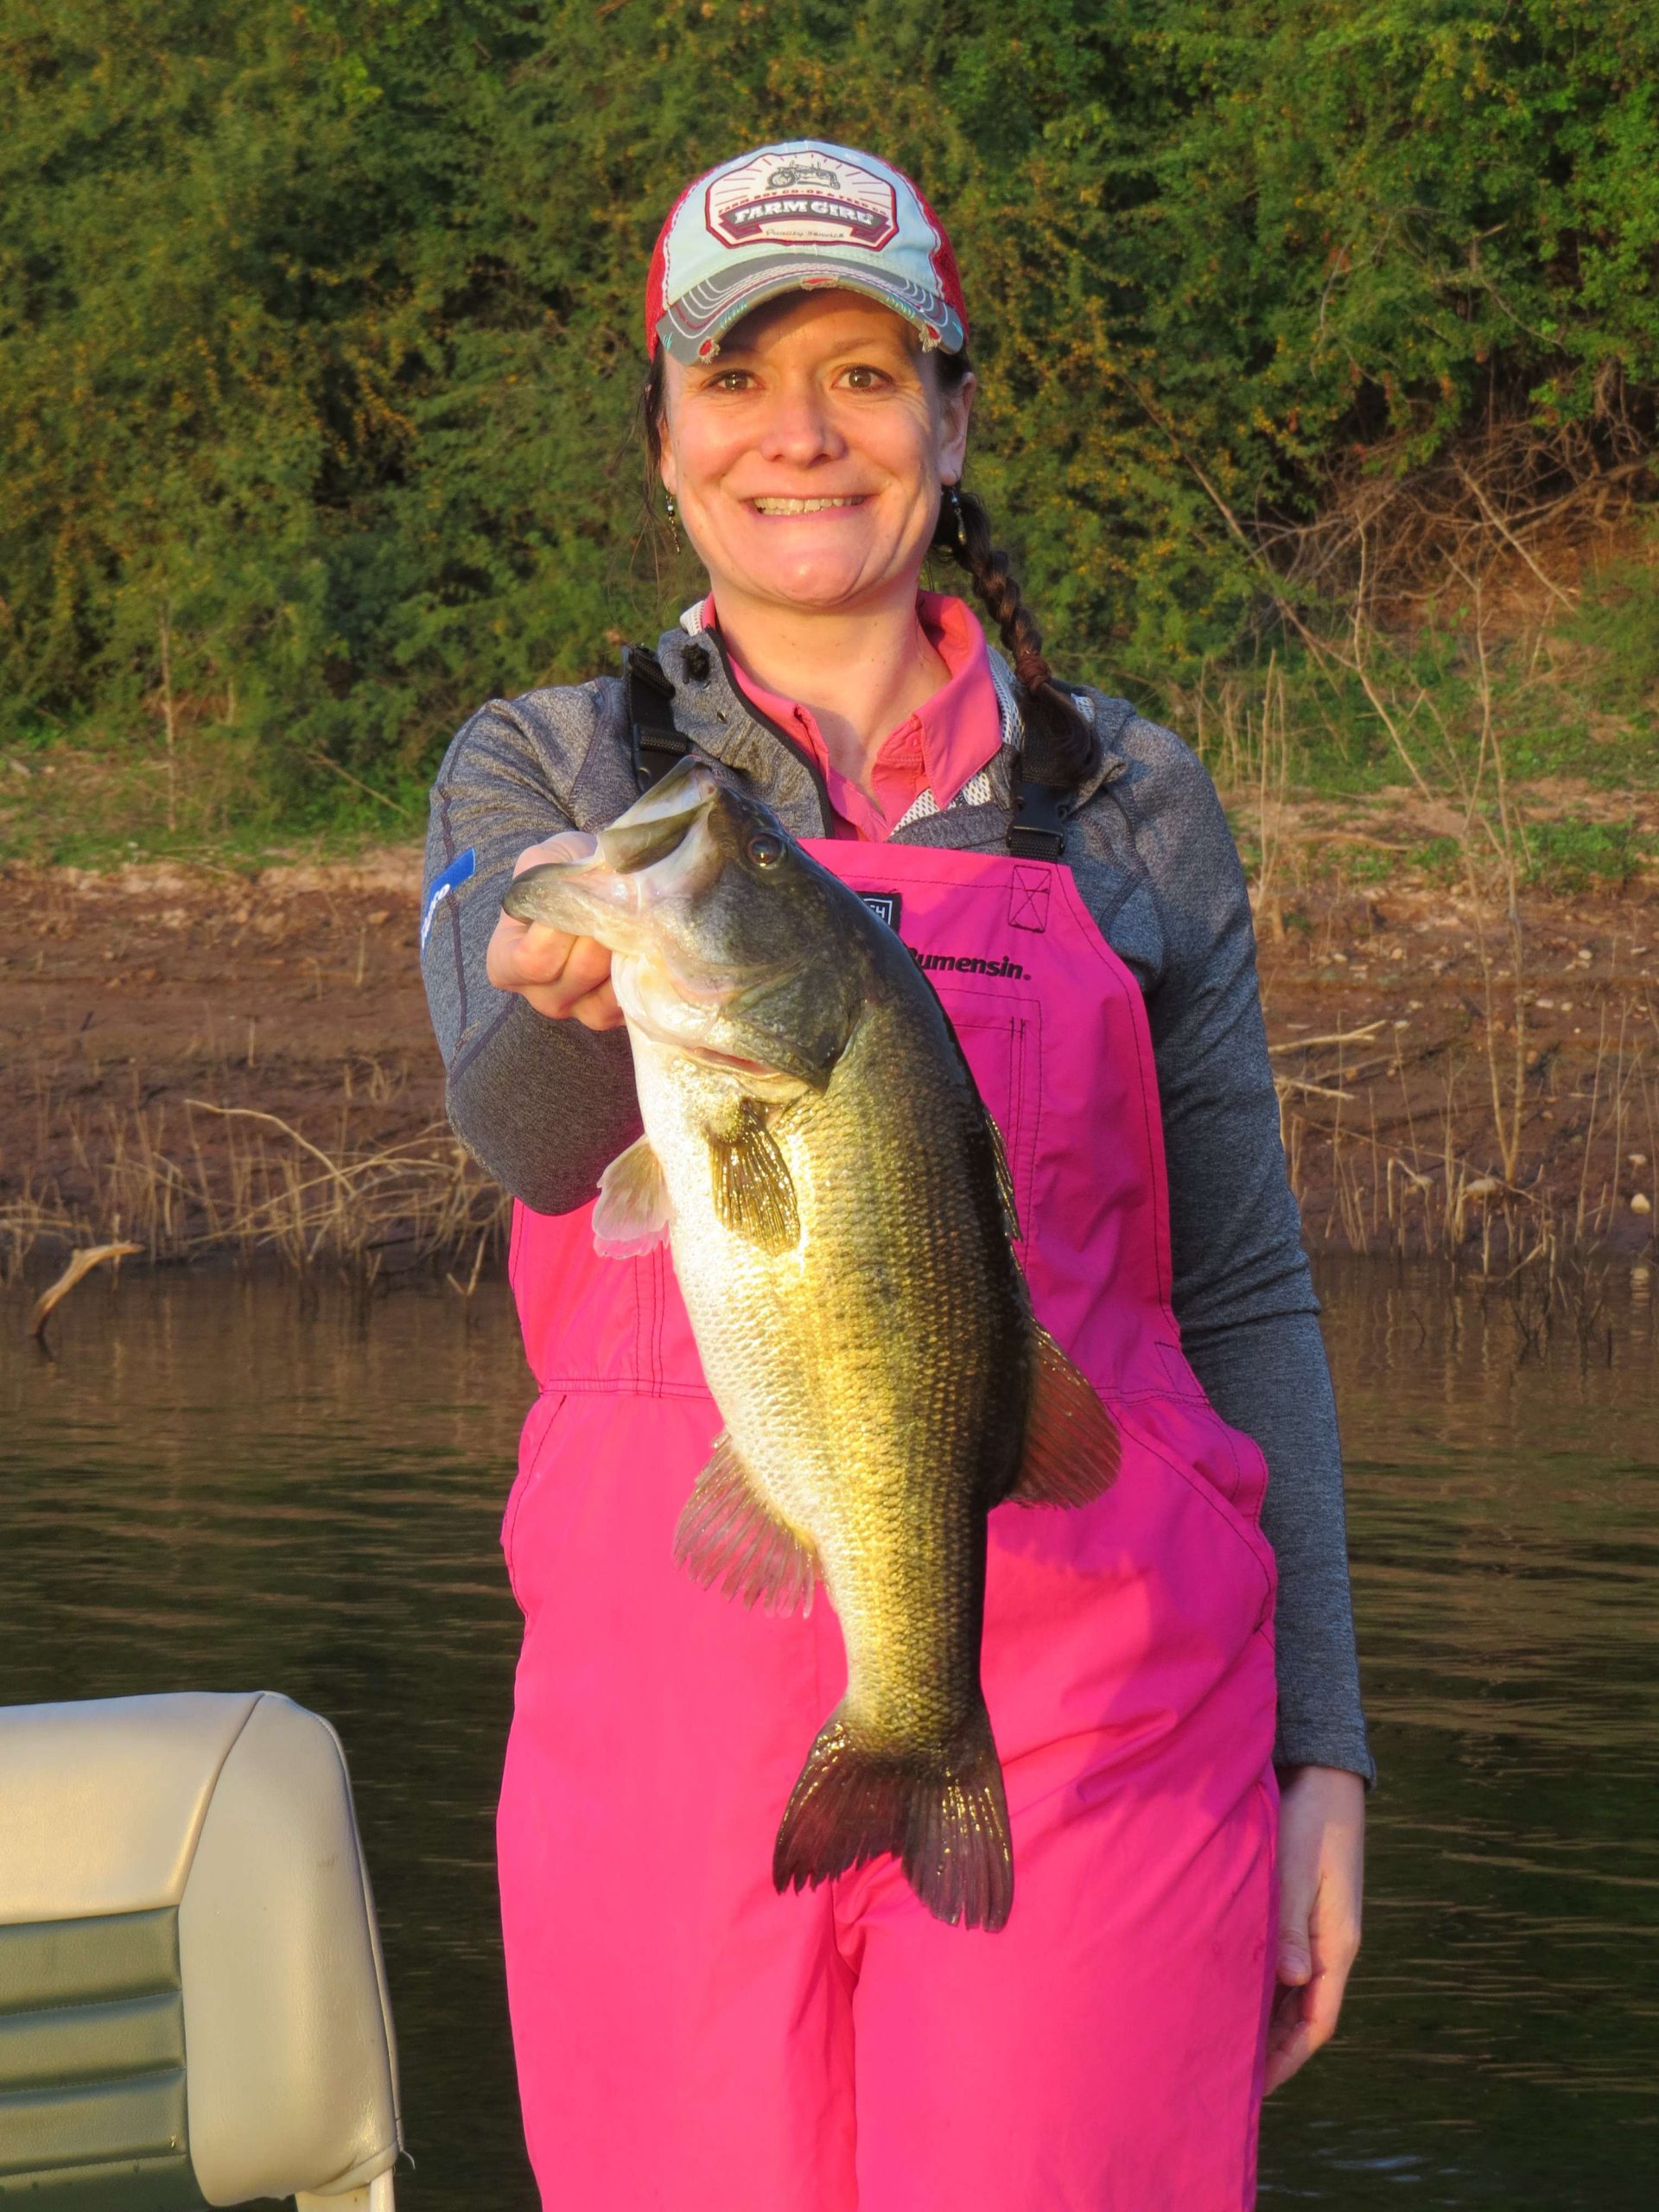 Sarah caught this one on a topwater bait, her new favorite technique.